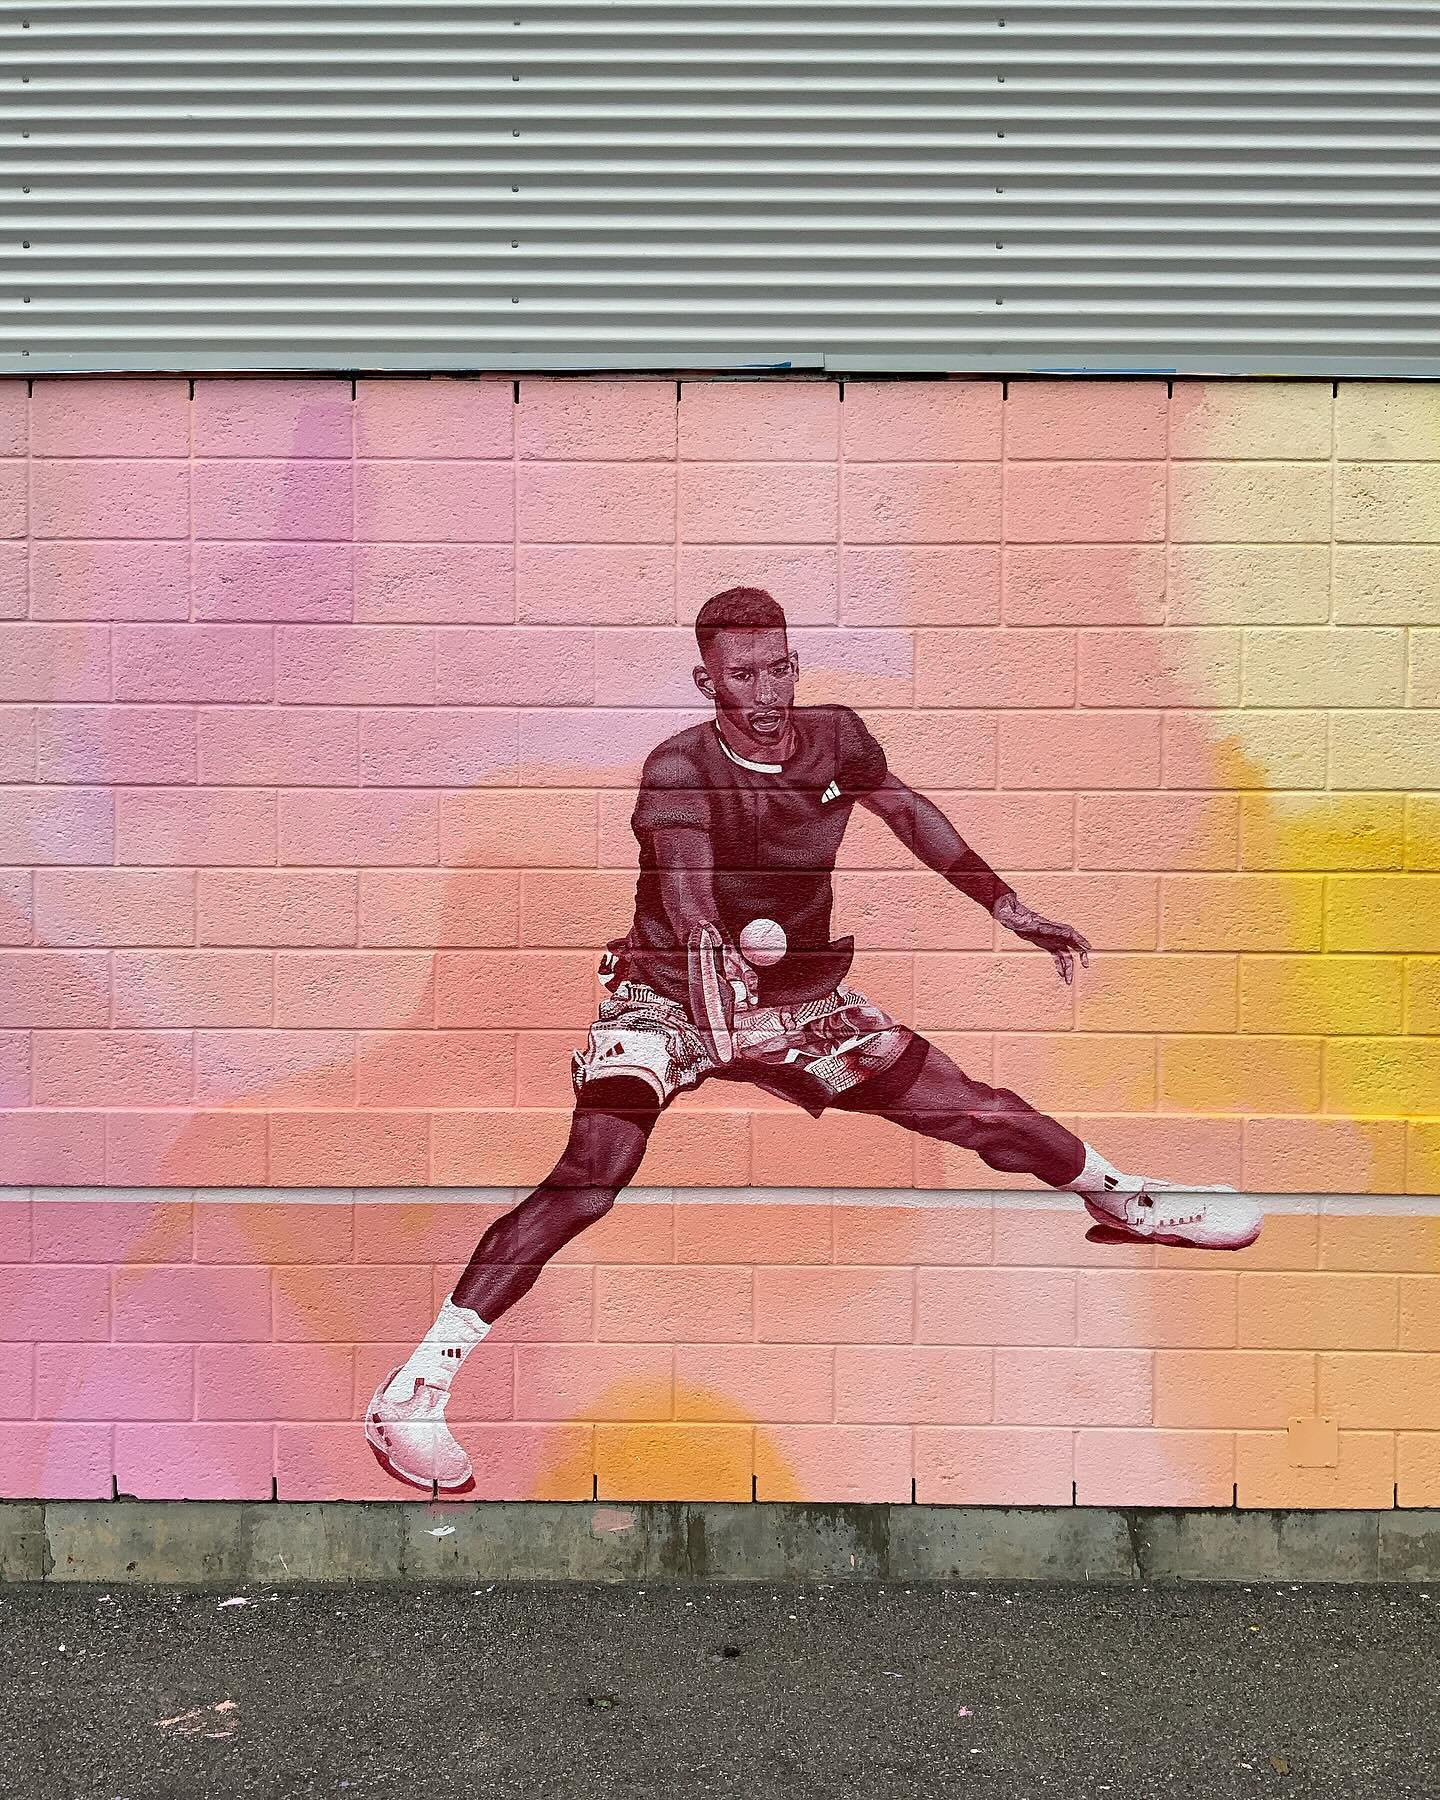 BAM! Mural reveal #1! I had the pleasure of working with @muralfestival and @tennismontreal to paint 2 Montreal-born tennis players @felixaliassime and @leylahannietennis! ✨ 

These mural walls are part of the IGA Stadium where everyone can practice 